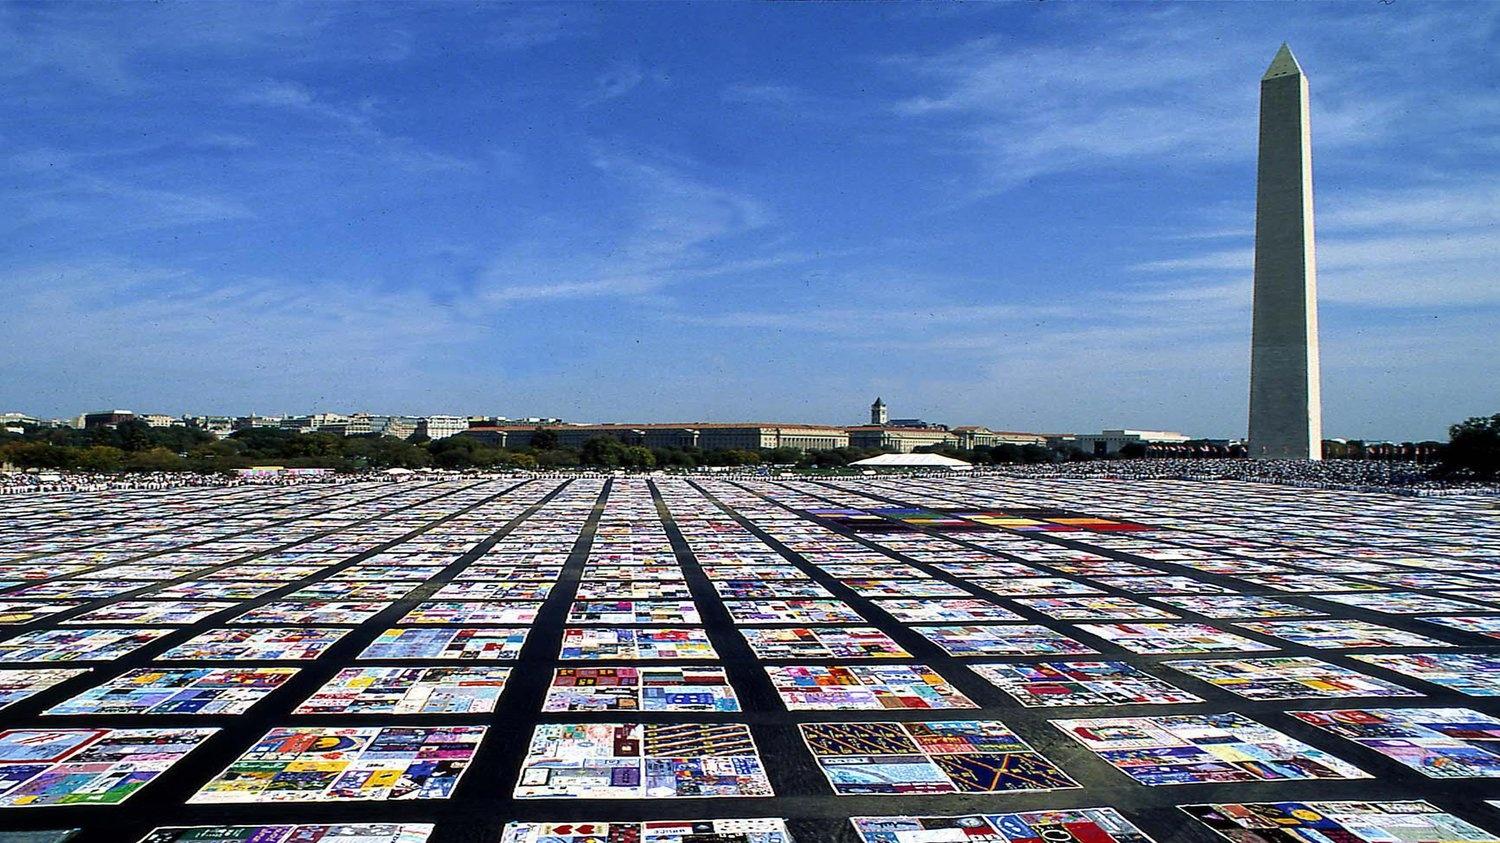 HIV/AIDs quilt at the National mall in Washington D.C.